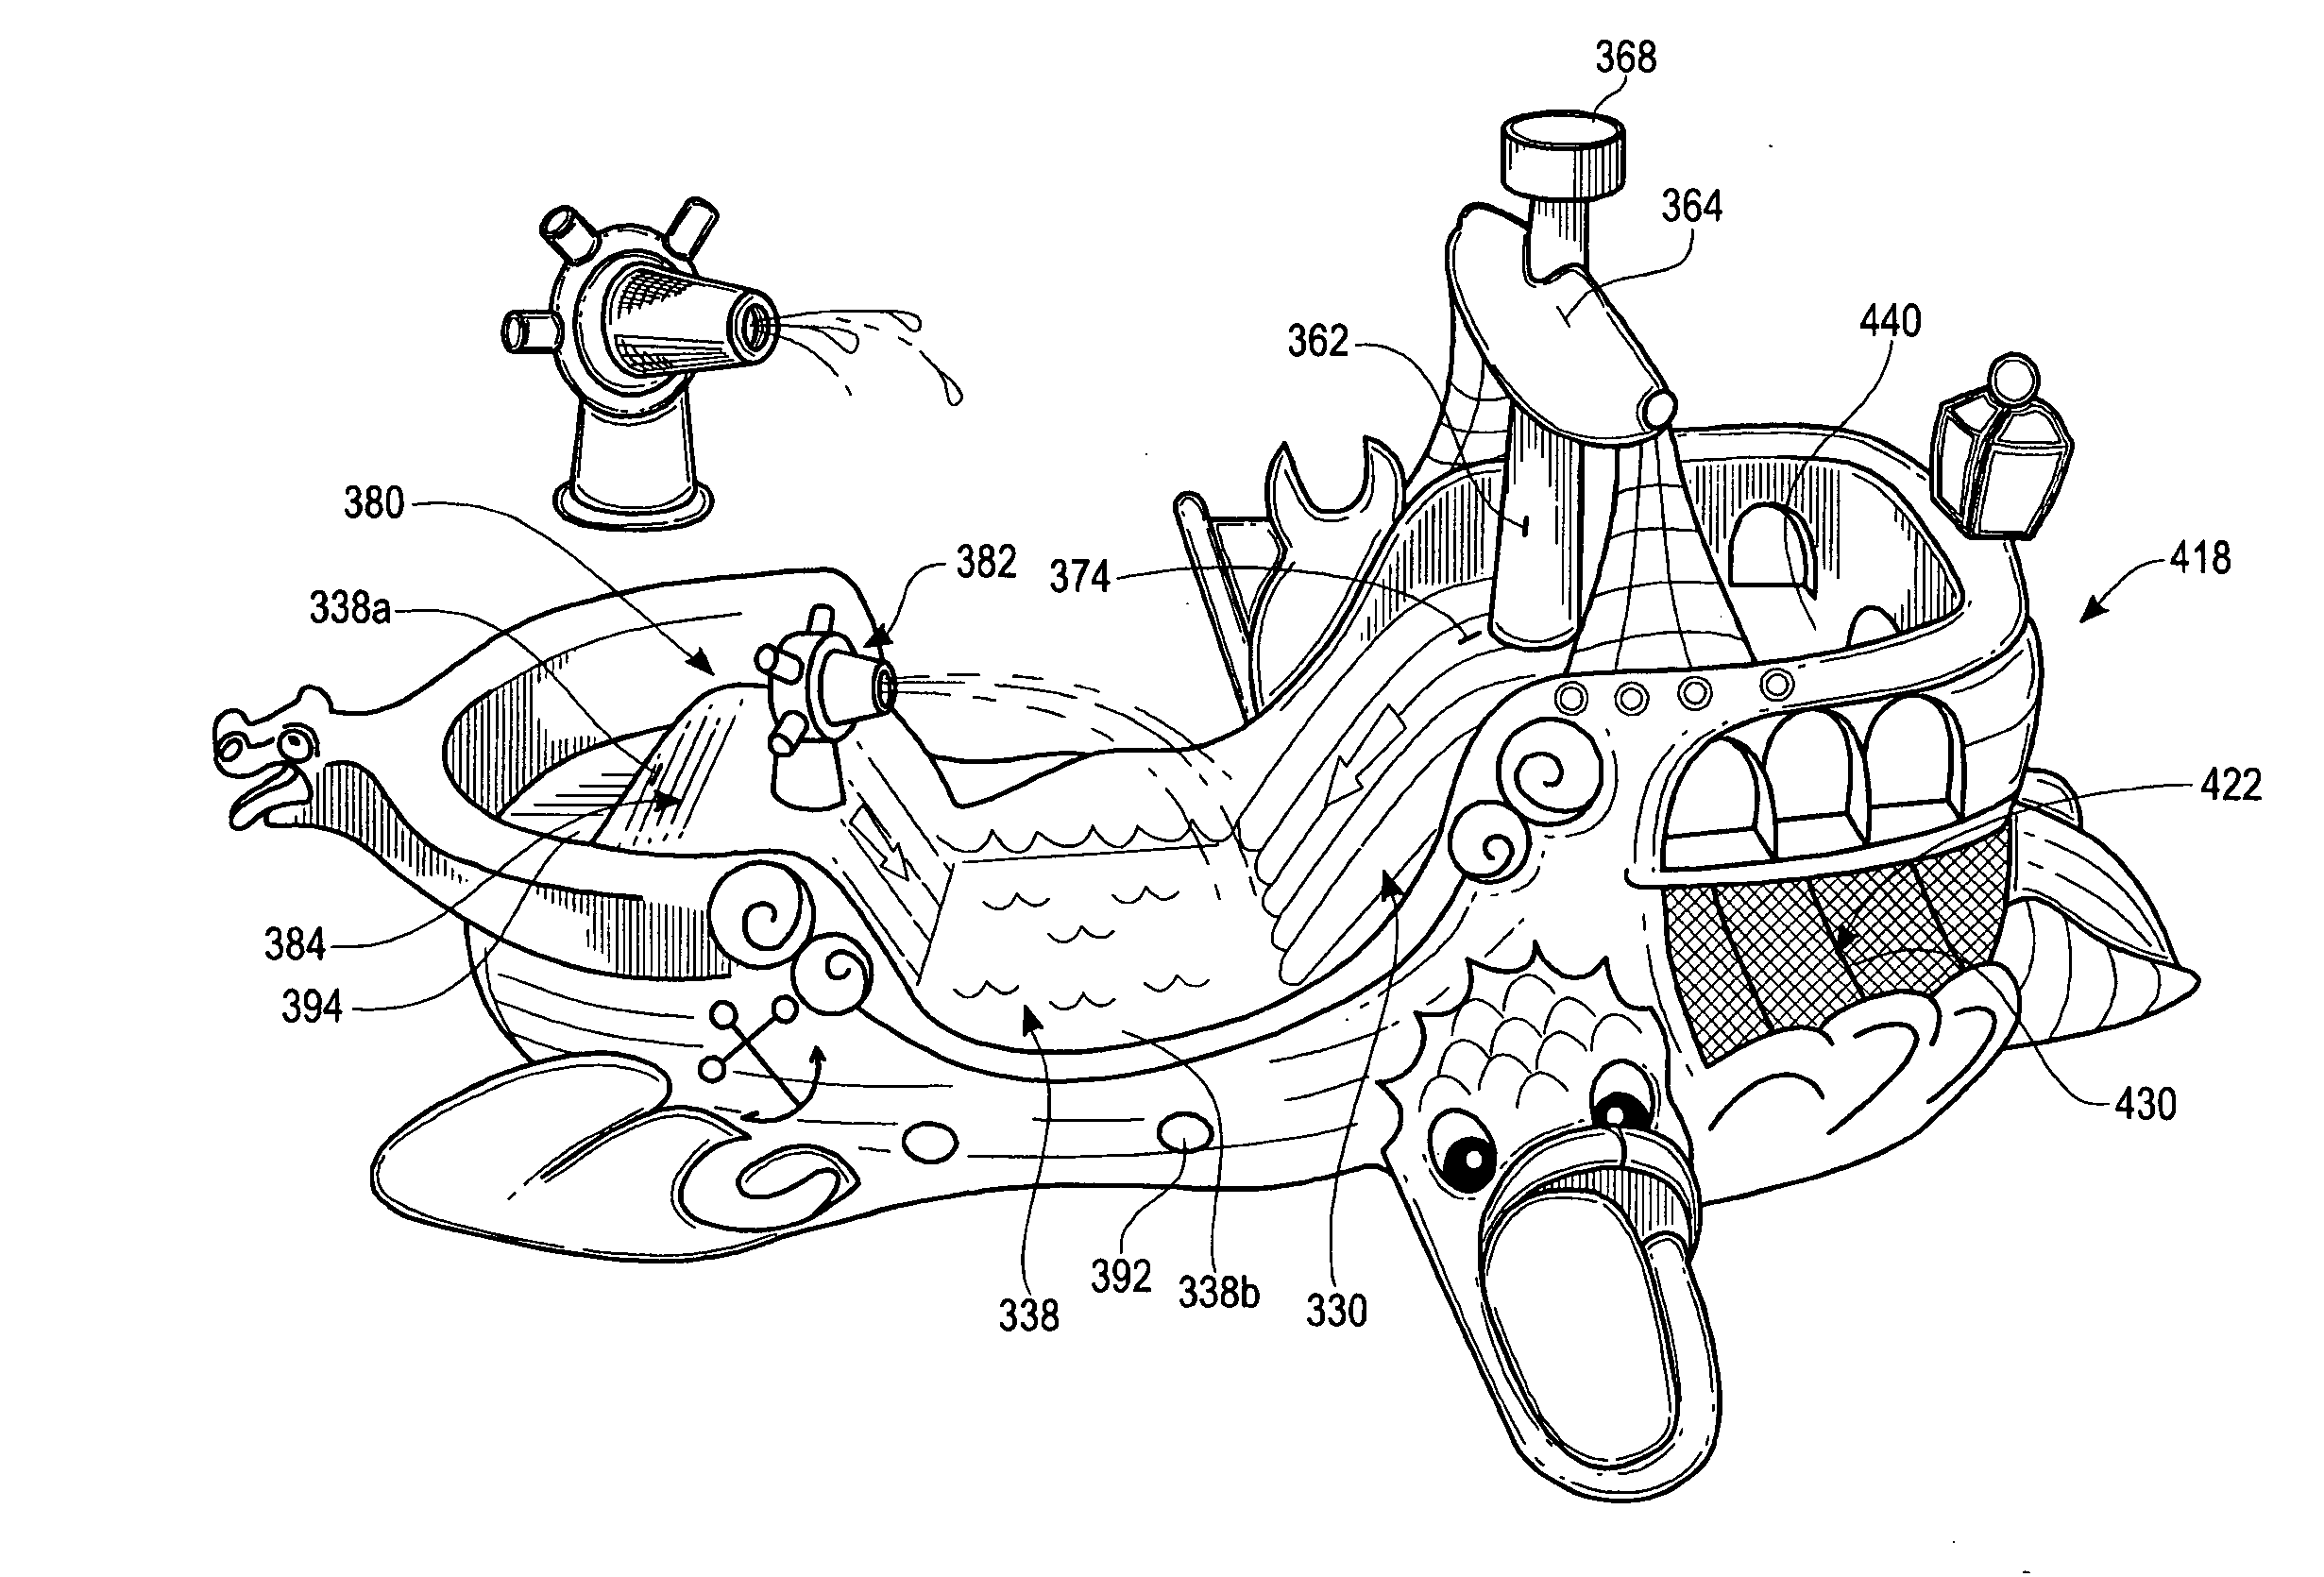 Inflatable ship-configured water toy and method